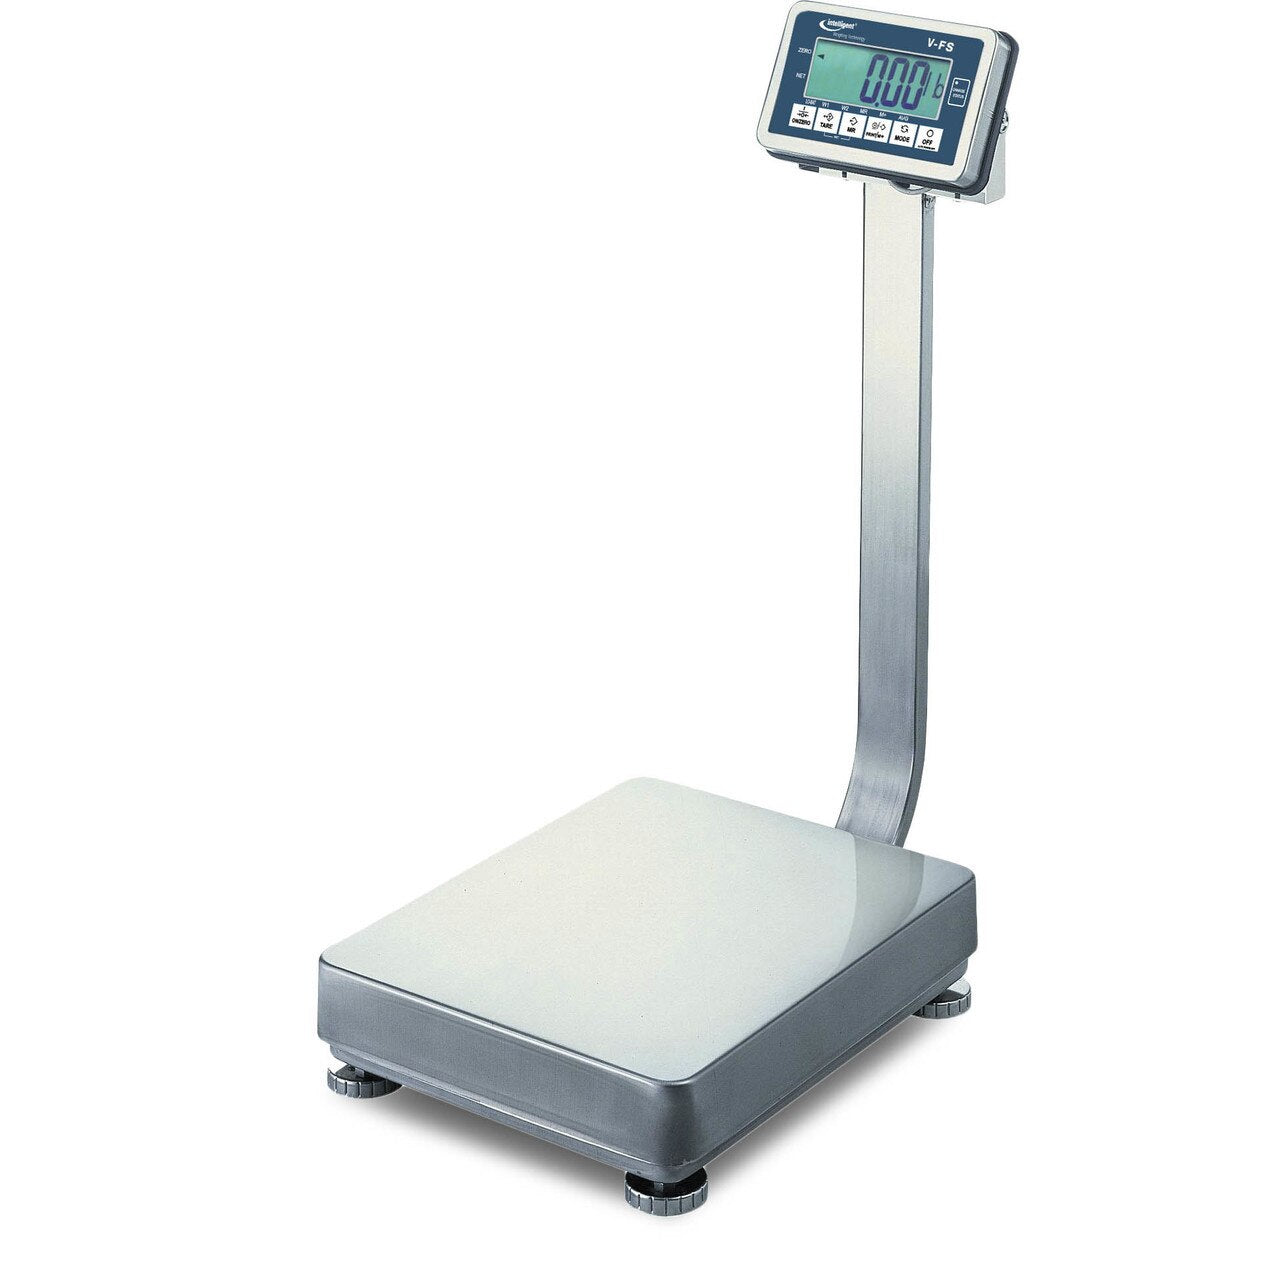 Intelligent Weighing Technology V-FS-330 Bench Scale, 330 lb x 0.05 lb